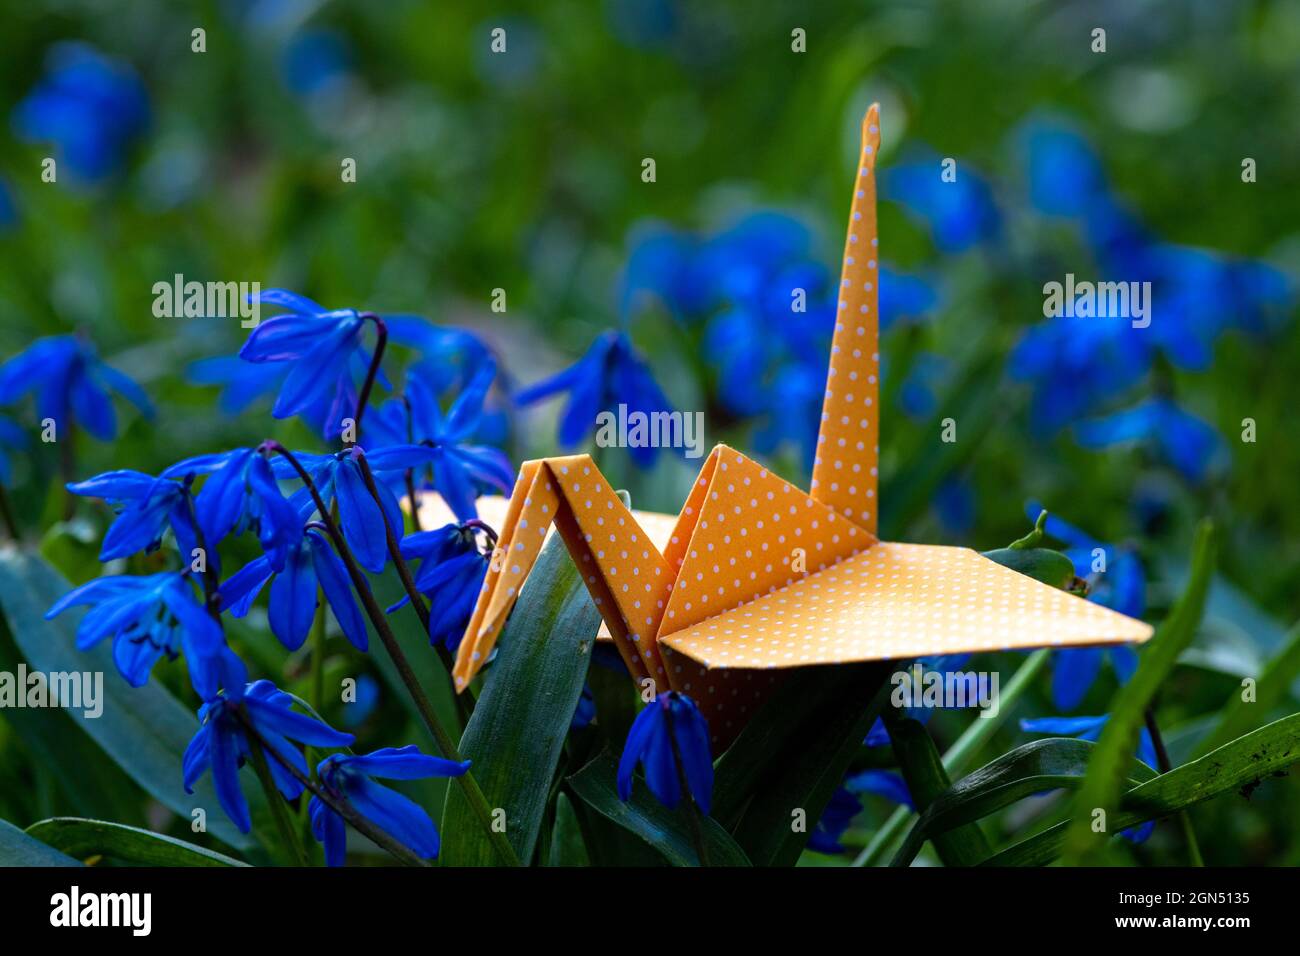 Close-up of a paper origami crane sitting on grass between blossoming early bloomers symbolizing spring time, a fresh start and hope Stock Photo